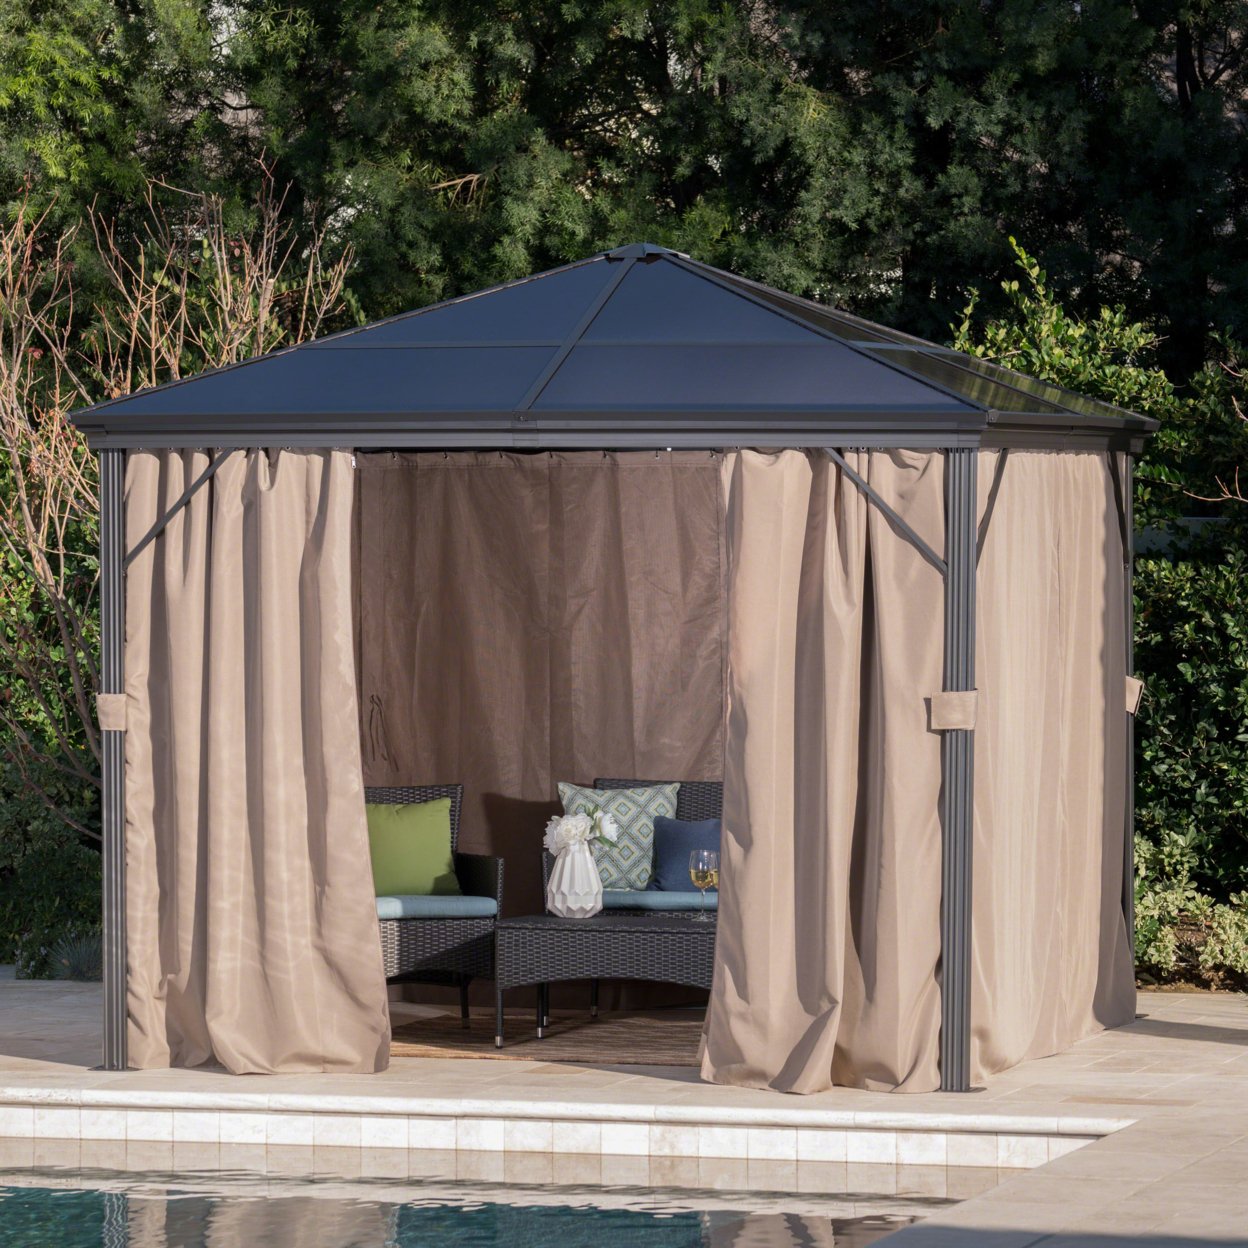 Bali Outdoor 10 X 10 Foot Rust Proof Aluminum Framed Hardtop Gazebo With Curtains - Brown/Black